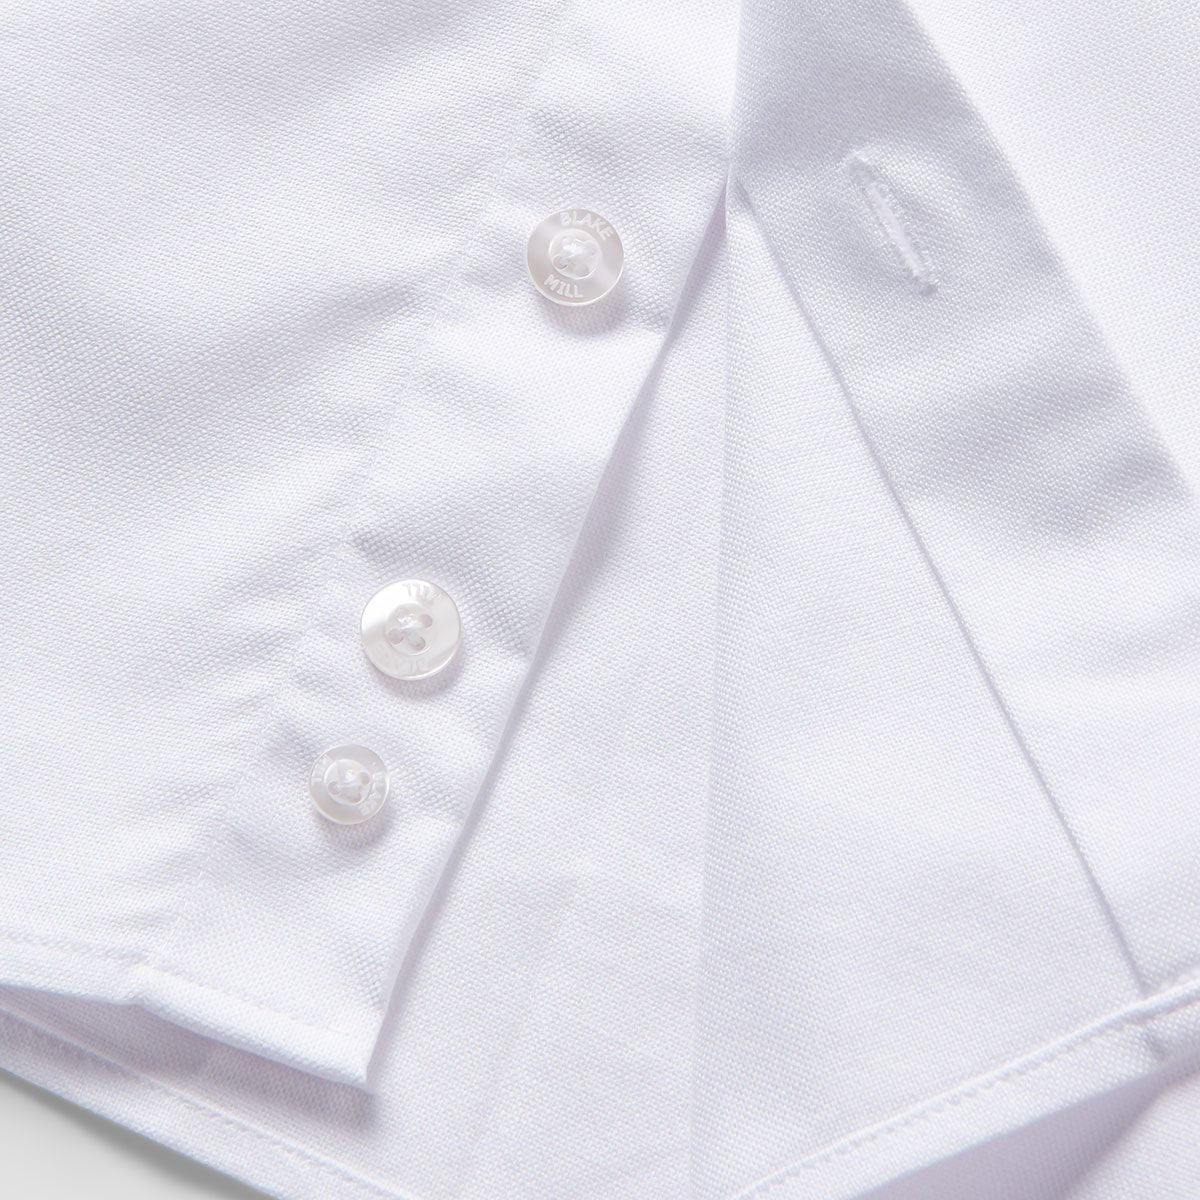 White Oxford with Skulls Accents Button - Down Shirt - Blake Mill